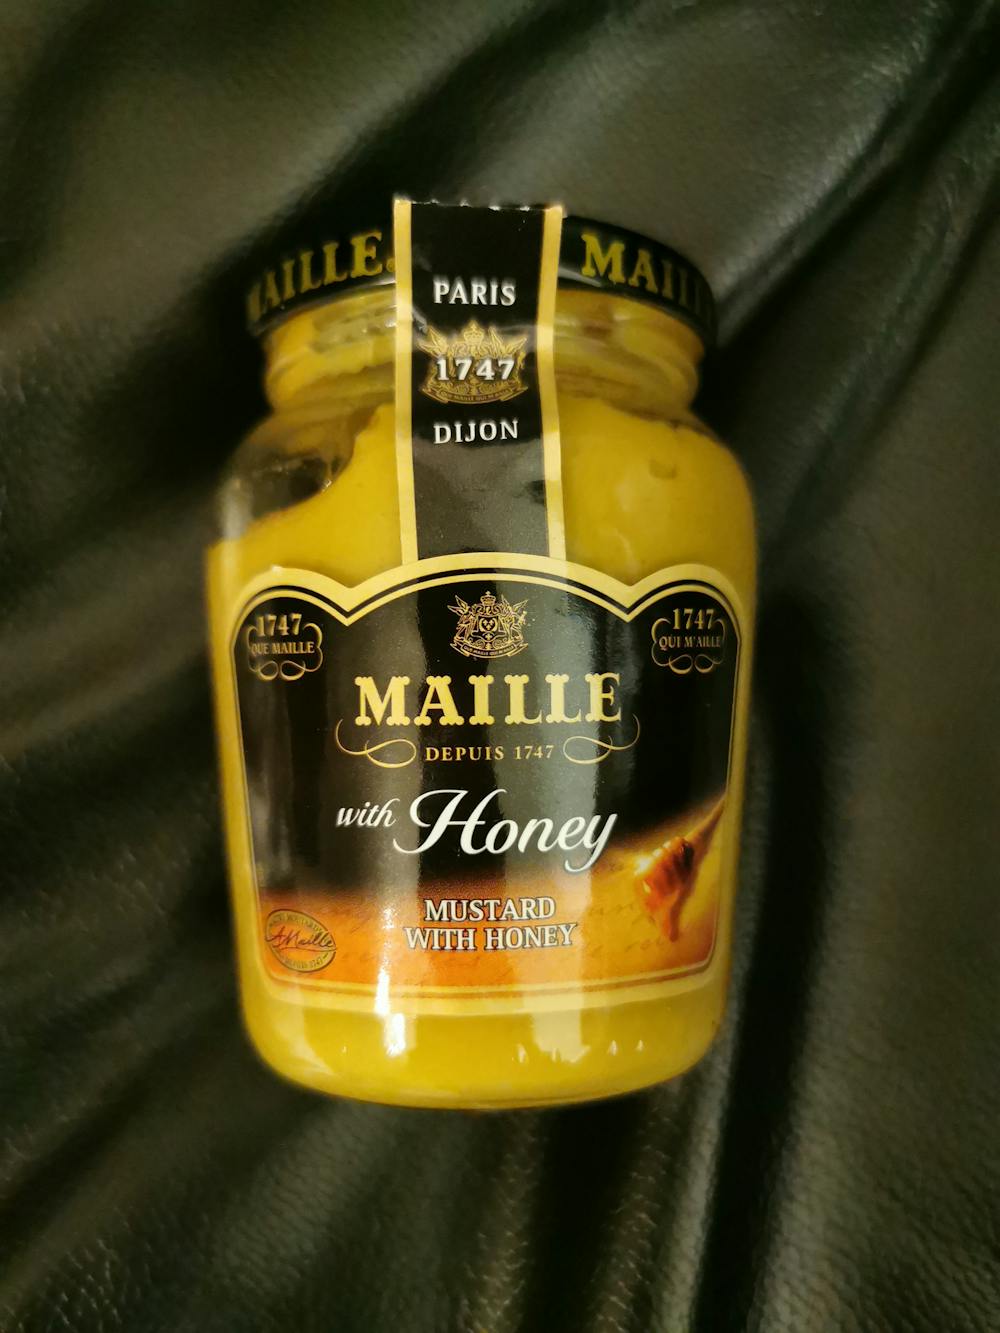 Mustard with honey, Maille